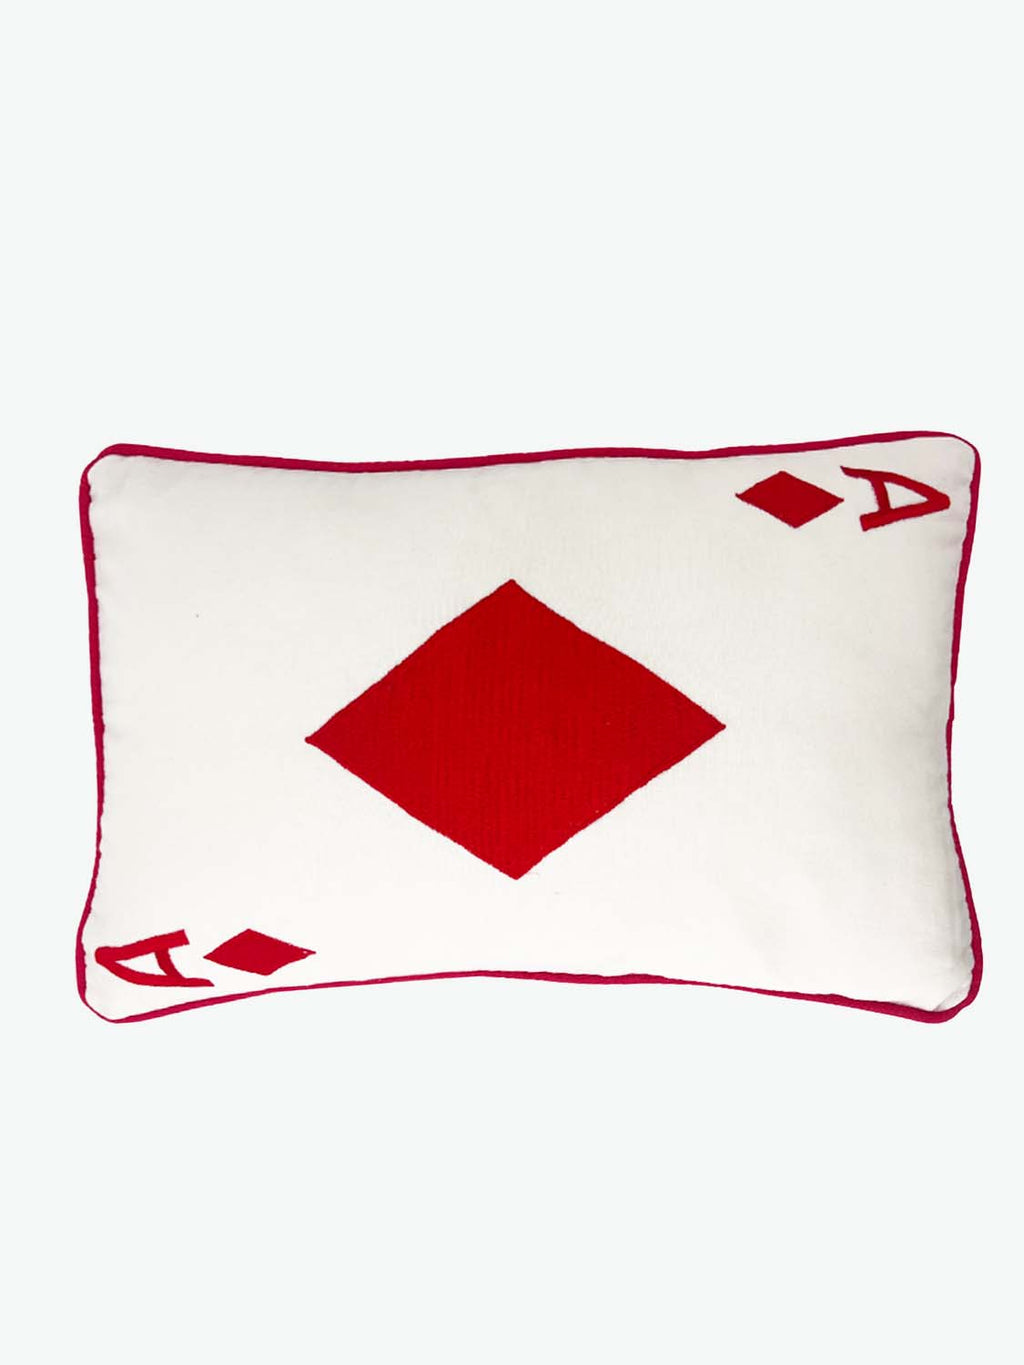 Les Ottomans Playing Card Ace Hand-Embroidered Cushion